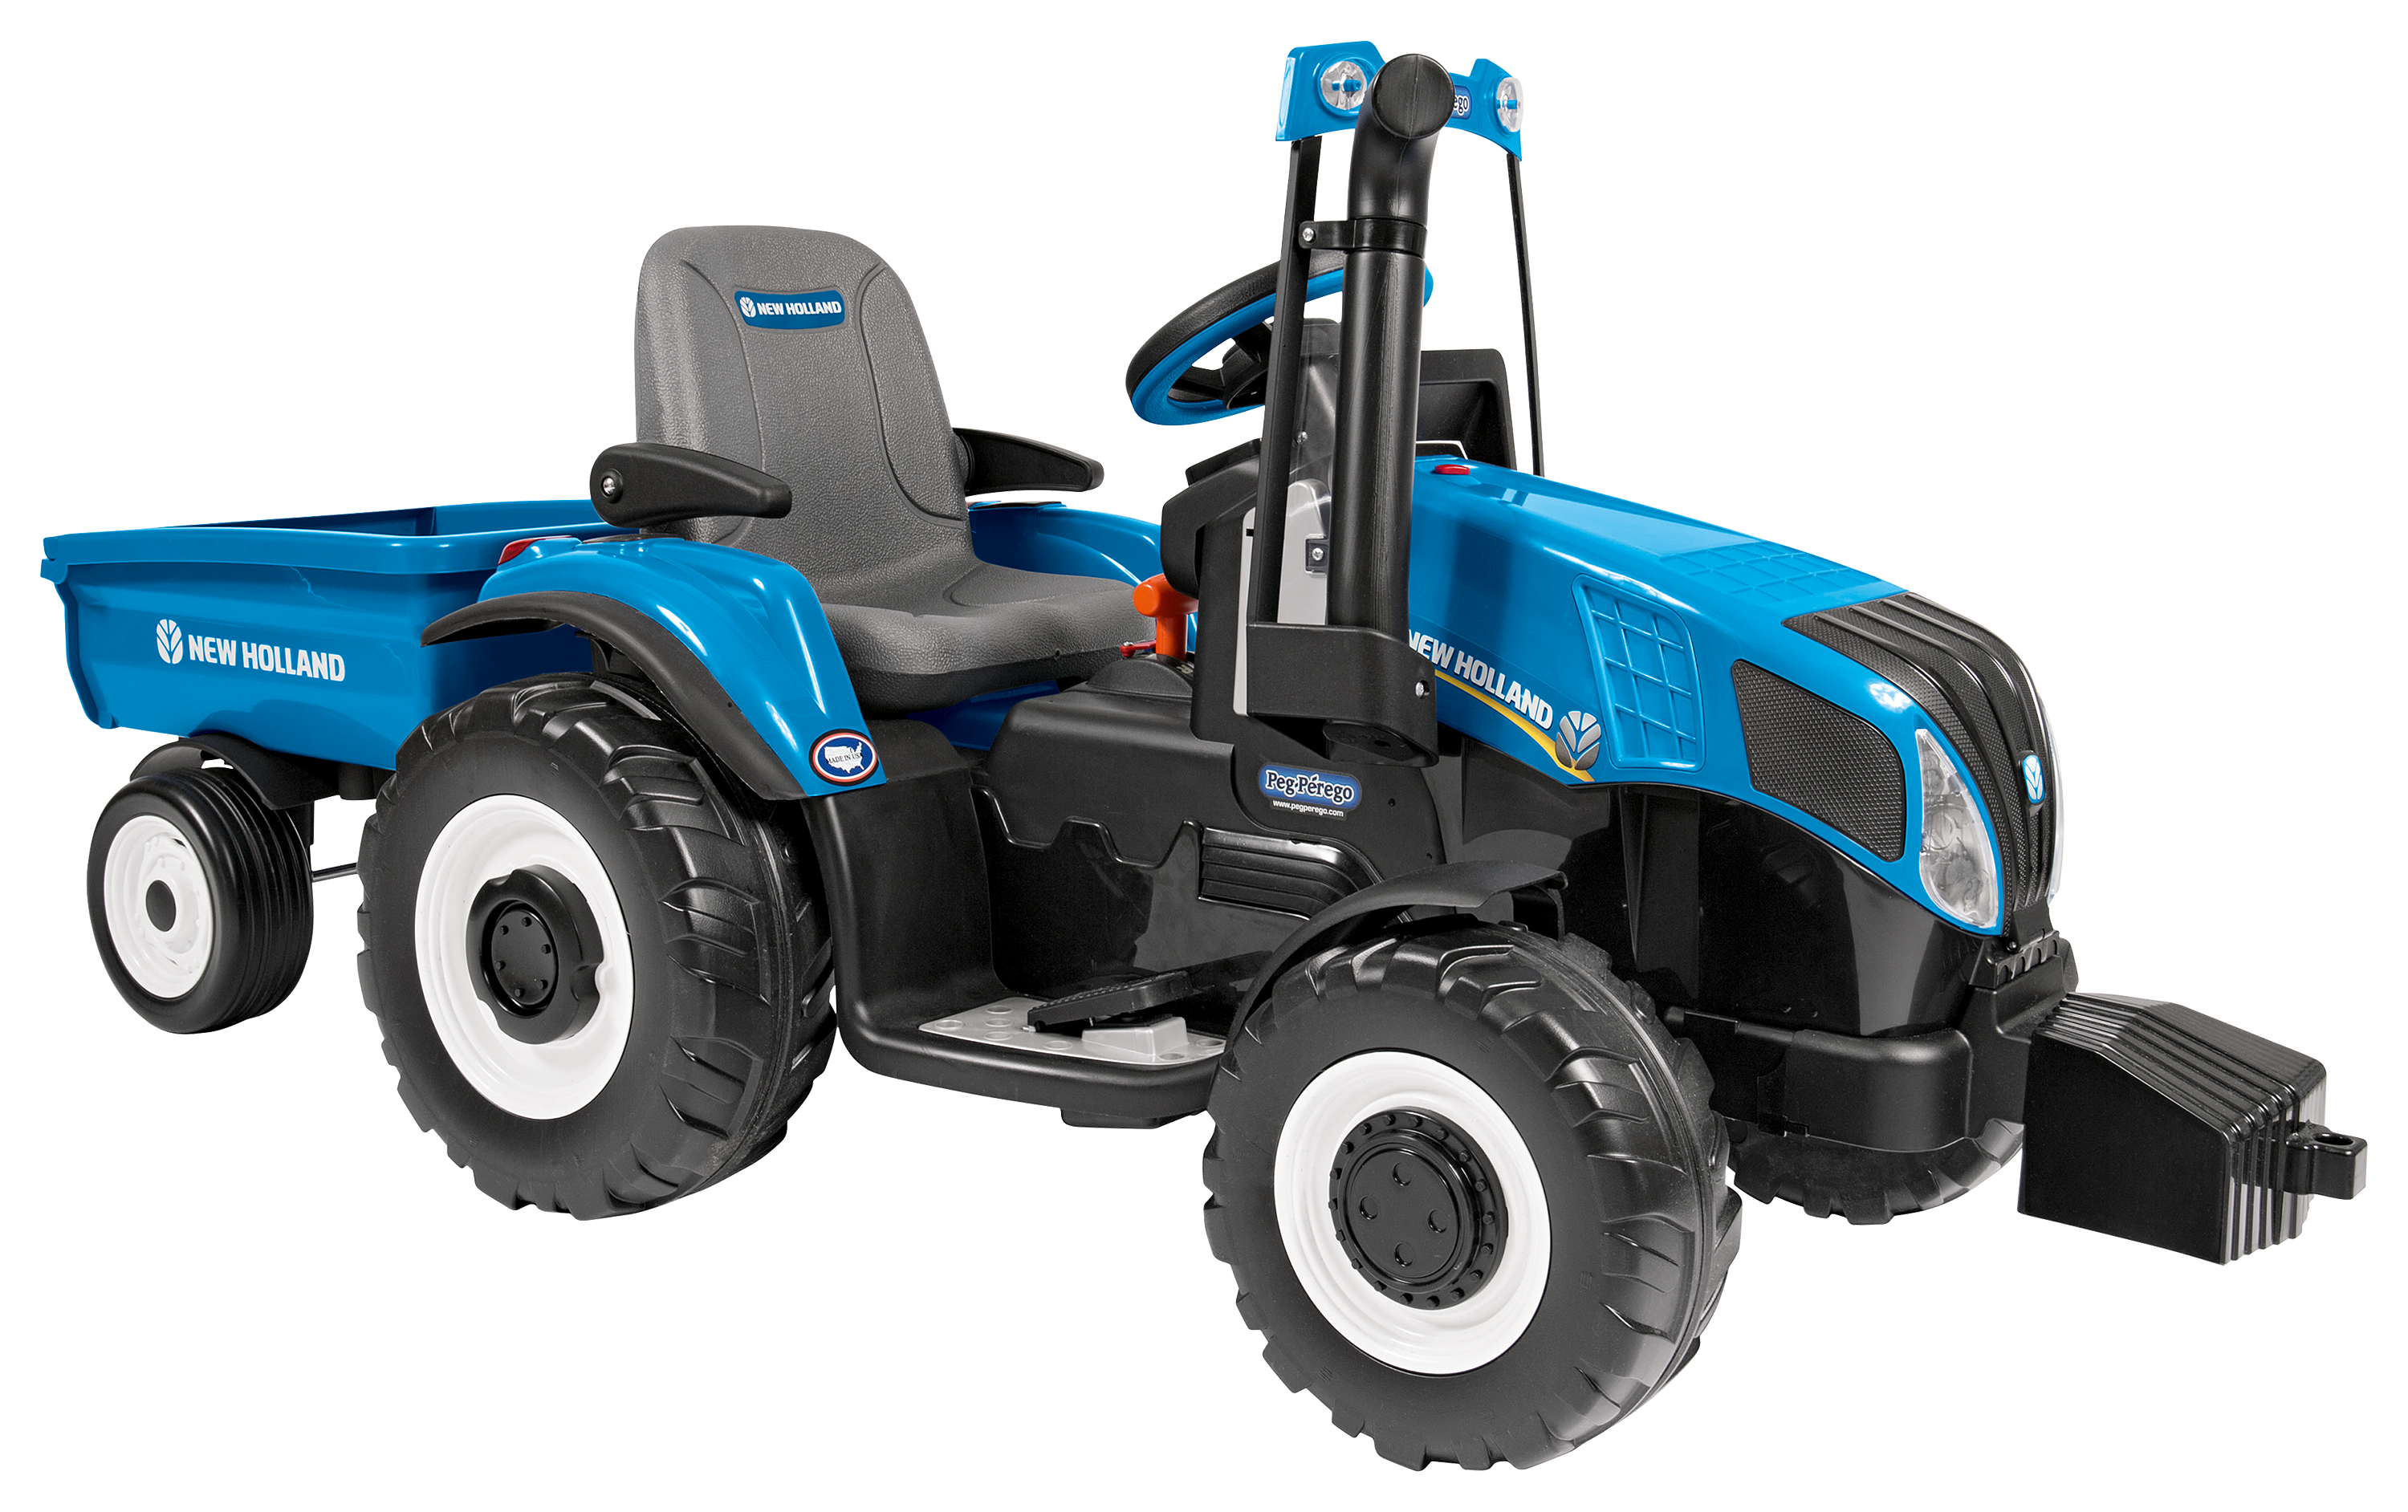 Peg Perego New Holland T8 Tractor Battery-Powered Ride-On Vehicle with Trailer for Kids